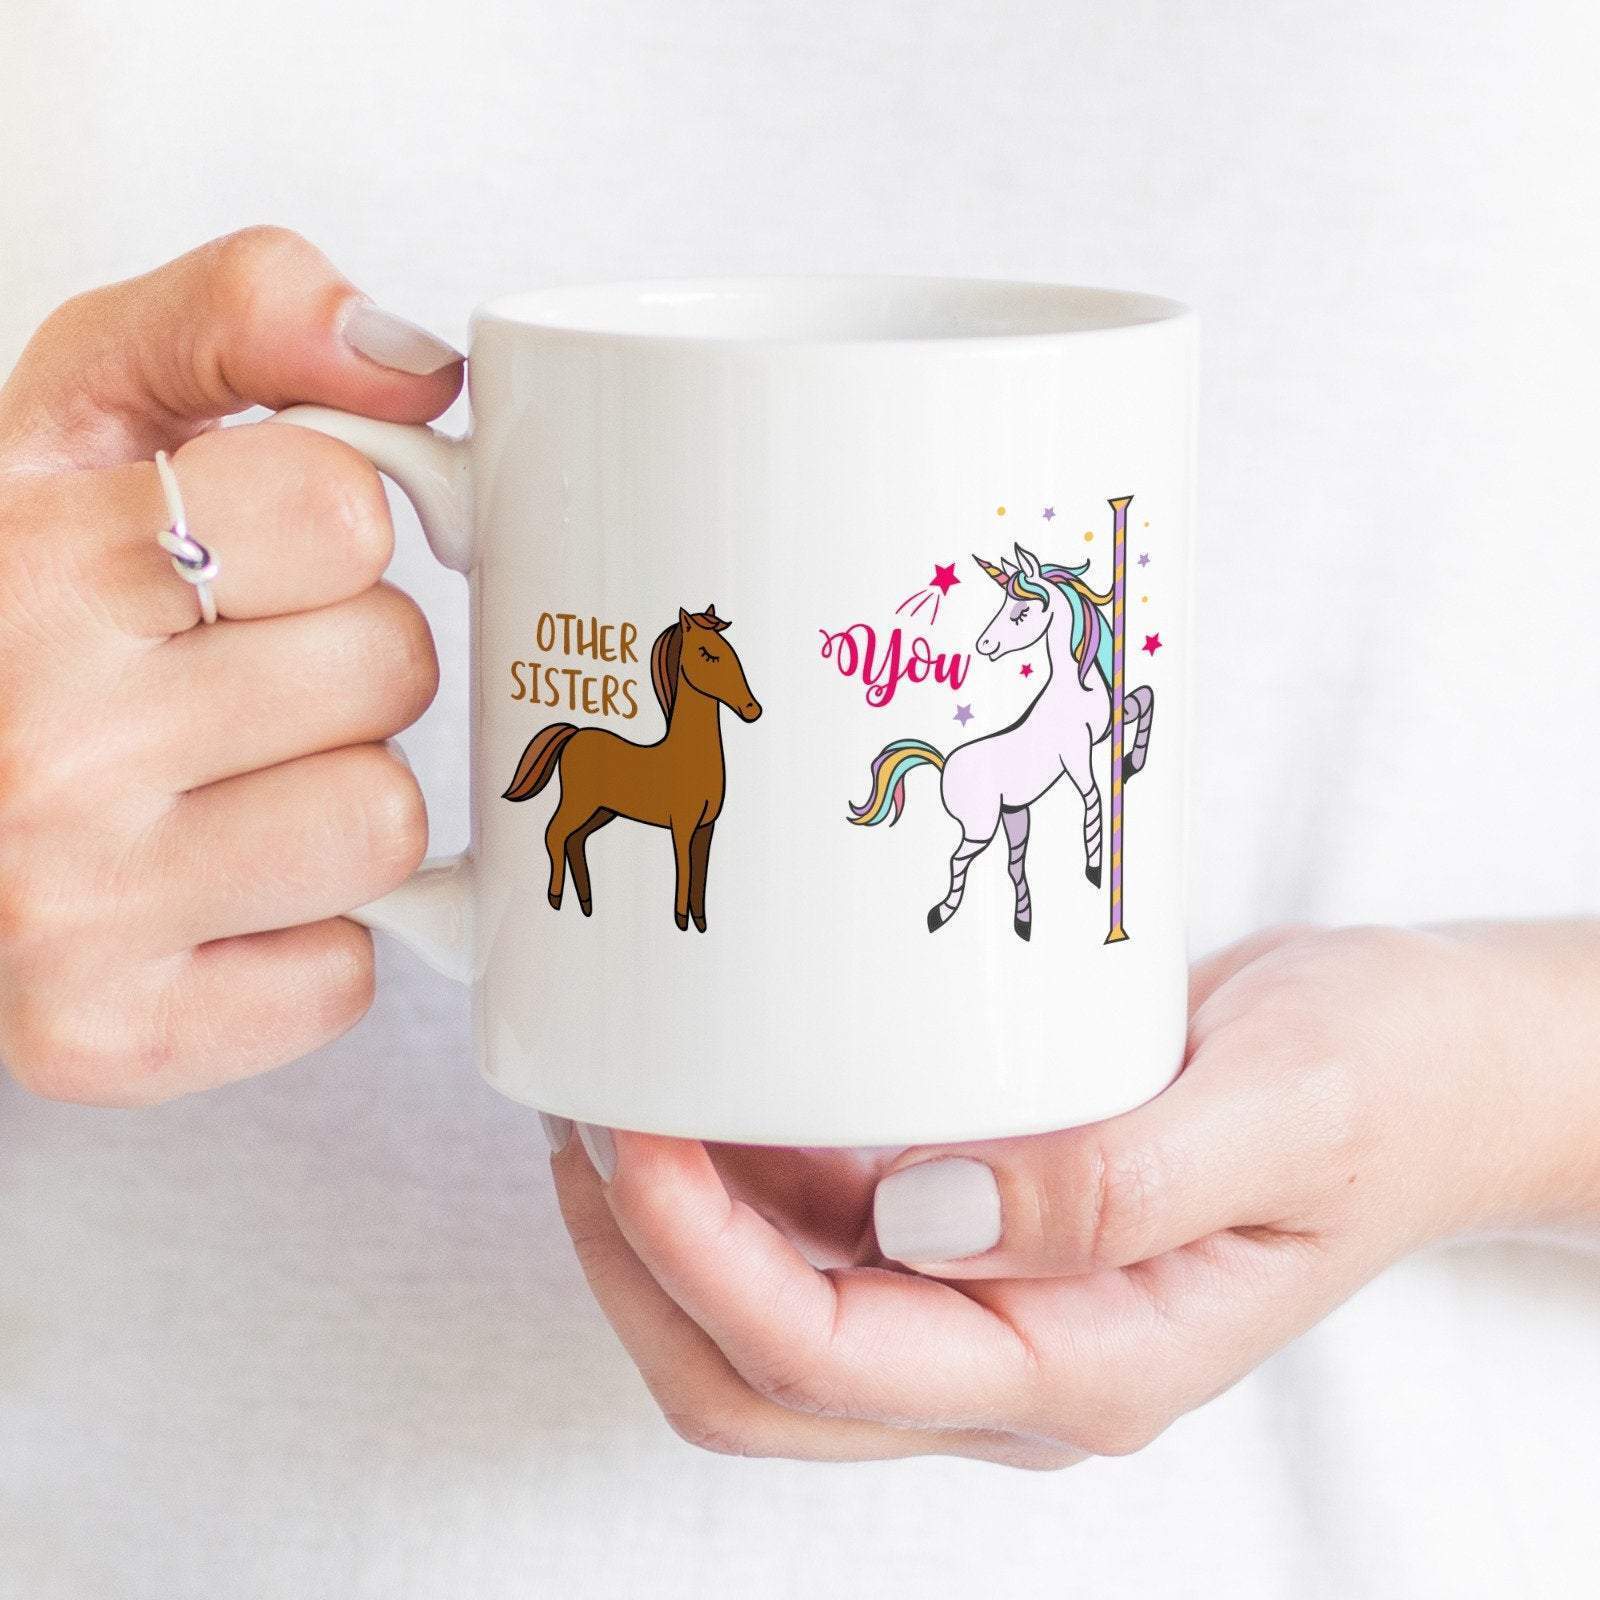 Funny sister Mug, Gift with horse and unicorn, Gift for sister